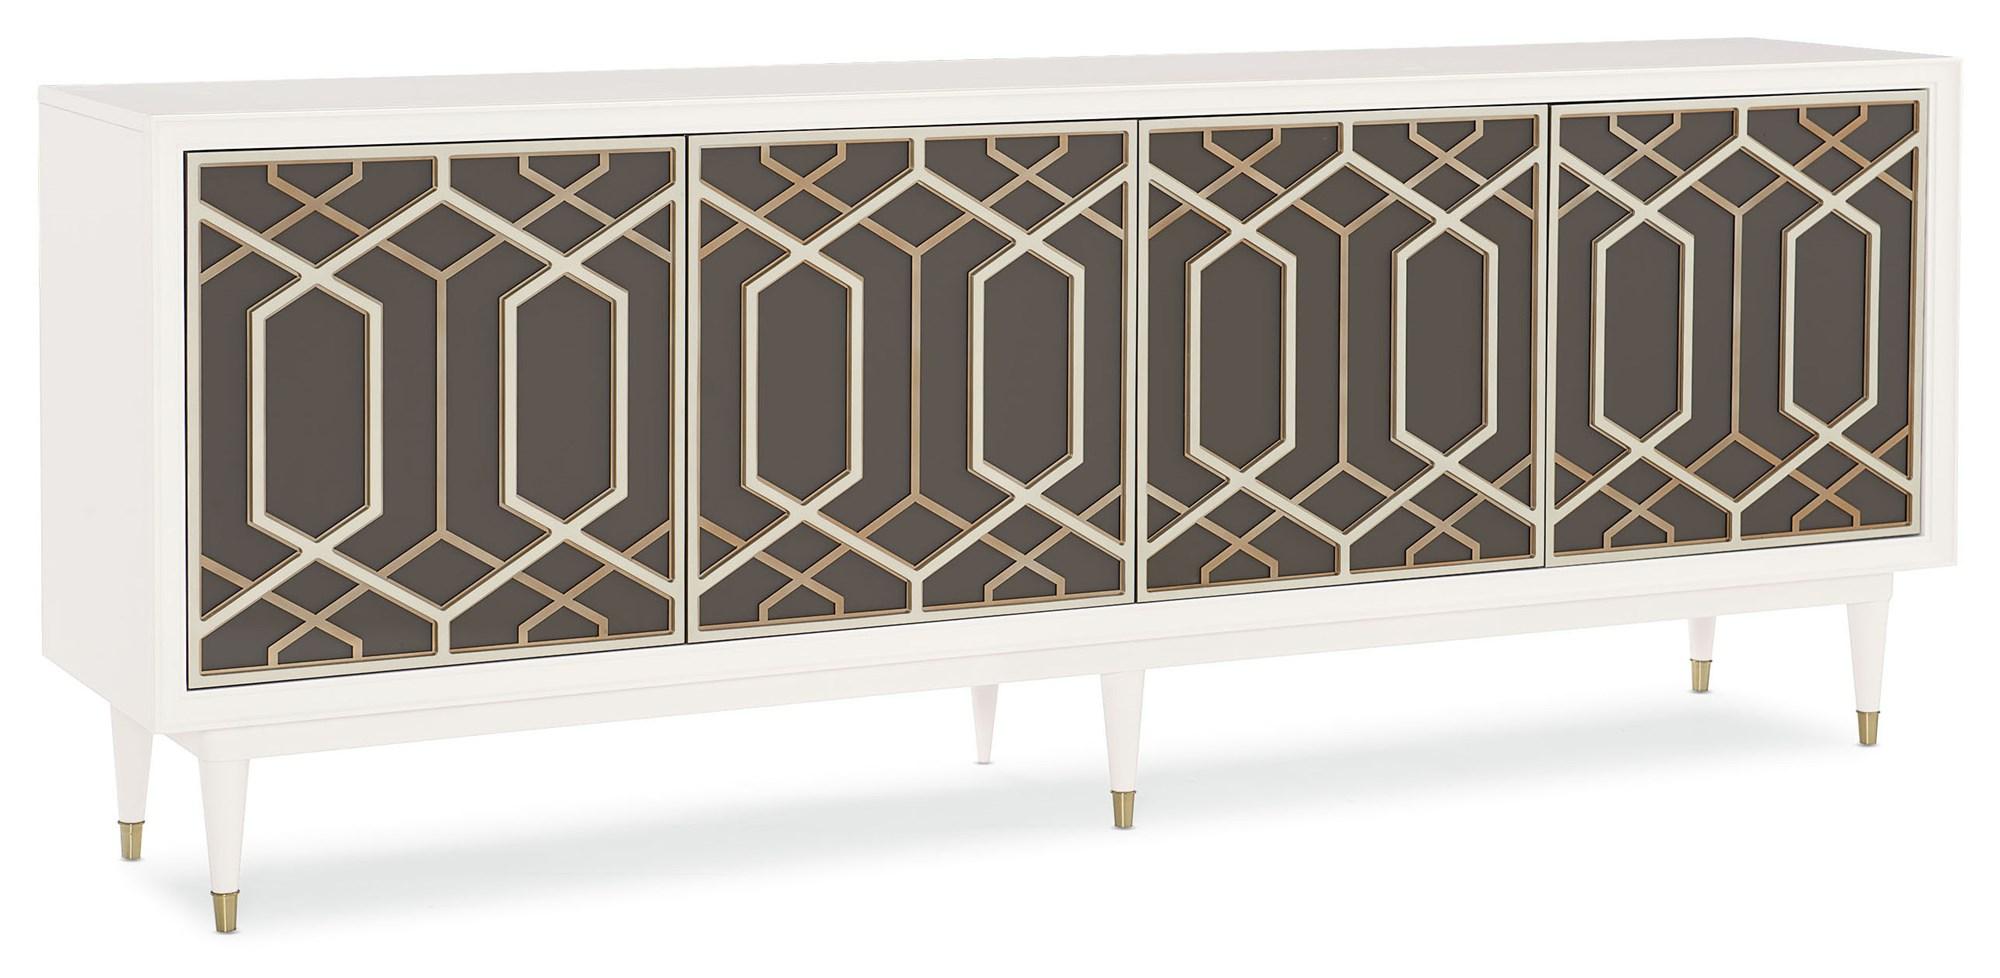 Contemporary Cabinet OUTSIDE INTEREST CLA-420-531 in White, Champagne 